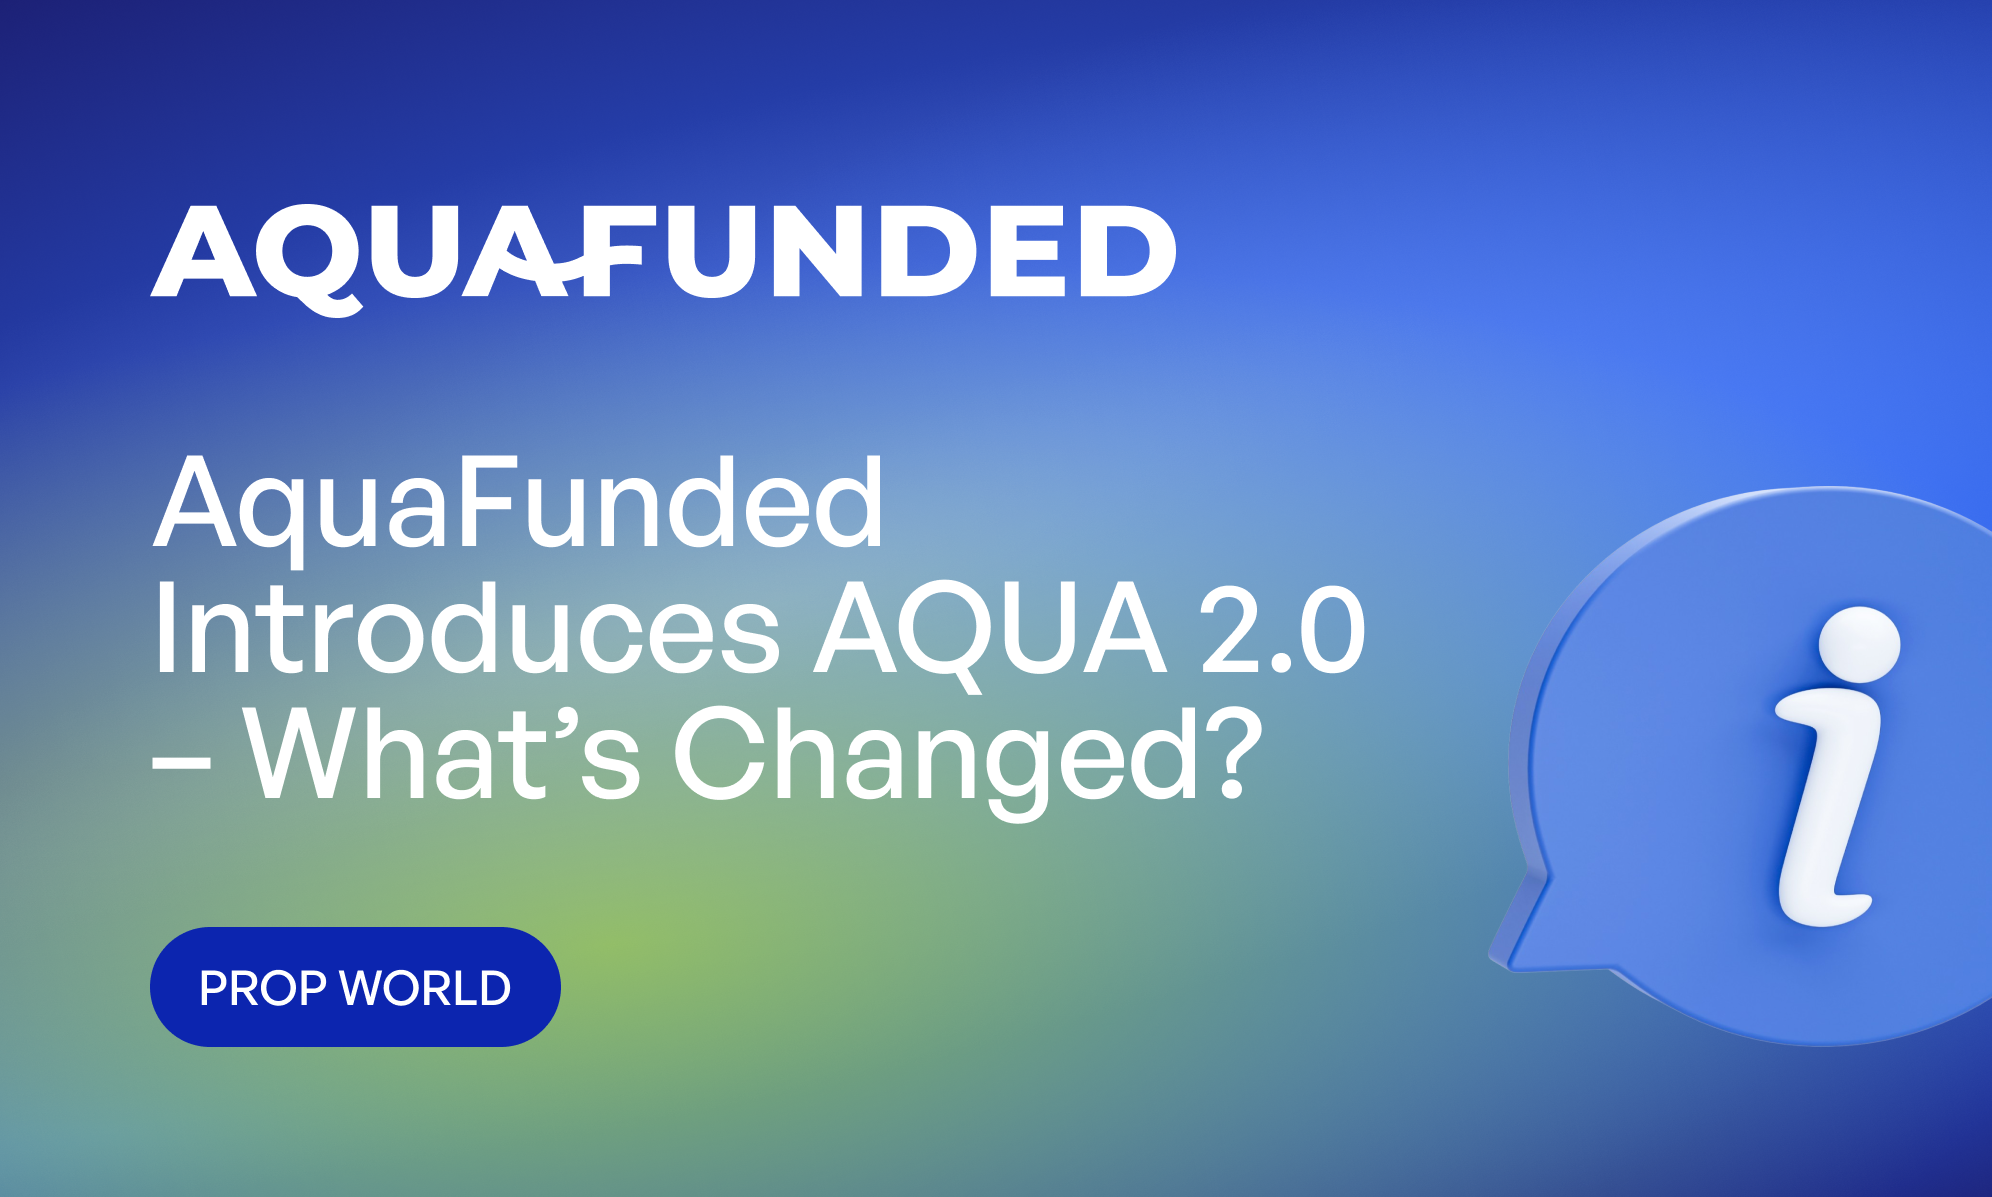 AquaFunded Introduces AQUA 2.0 – What’s Changed?